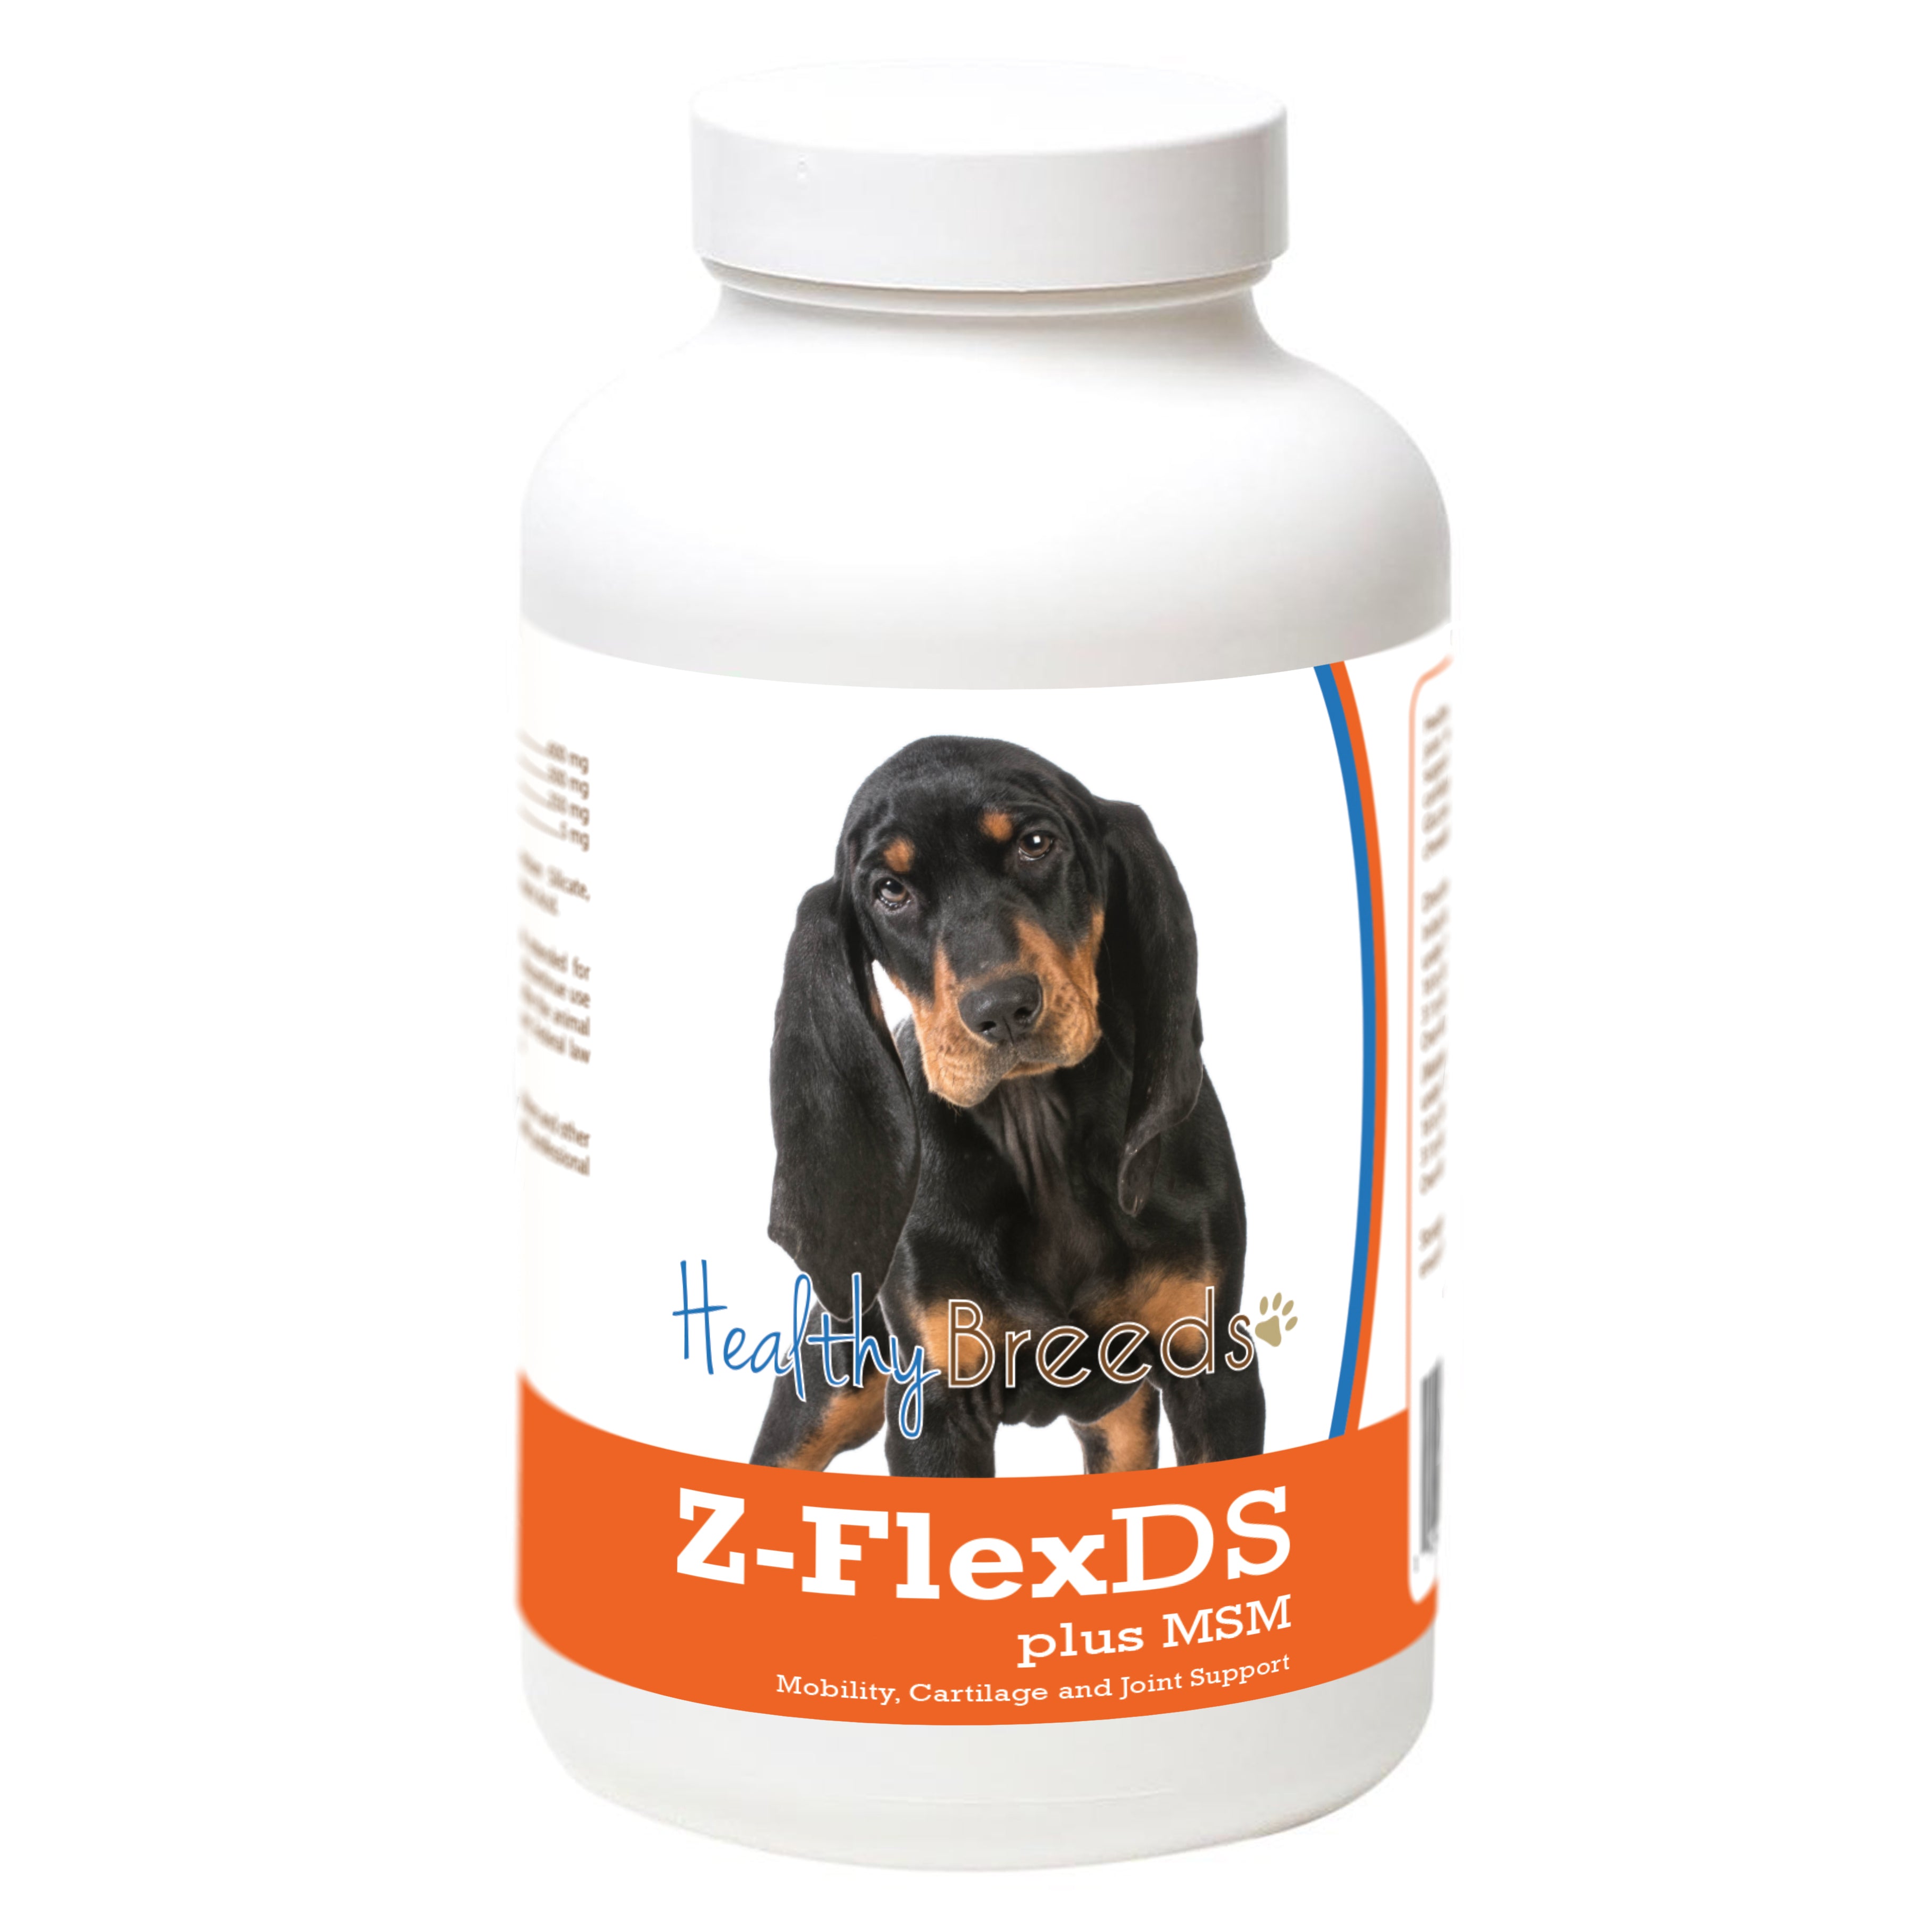 Black and Tan Coonhound Z-FlexDS plus MSM Chewable Tablets 60 Count